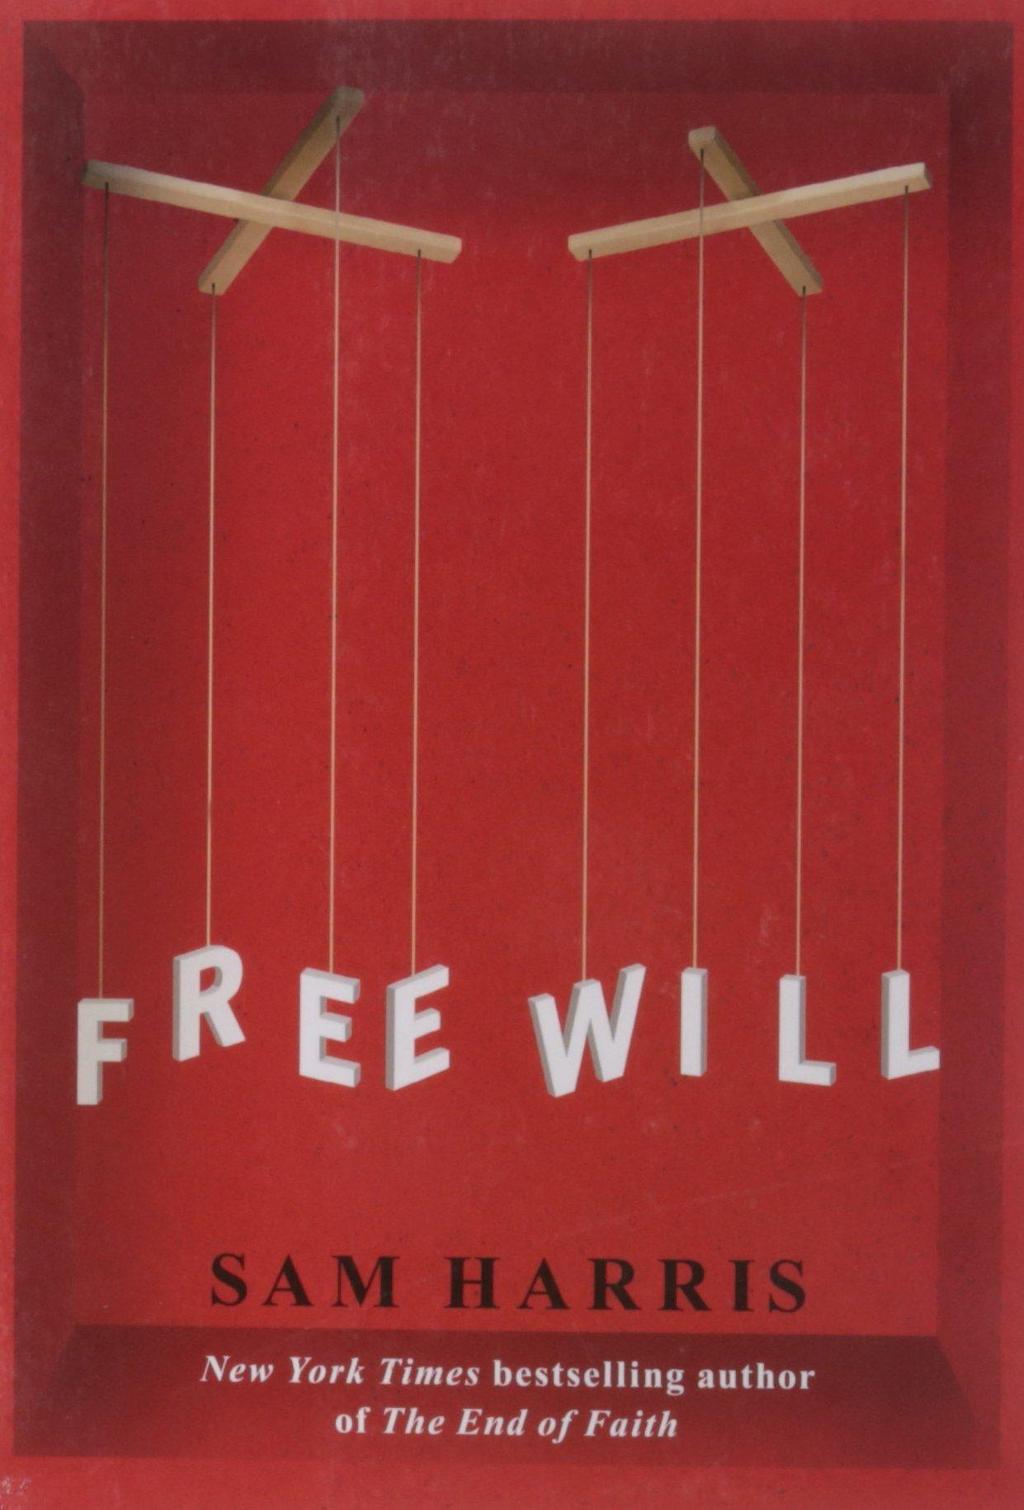 Free will is an illusion.